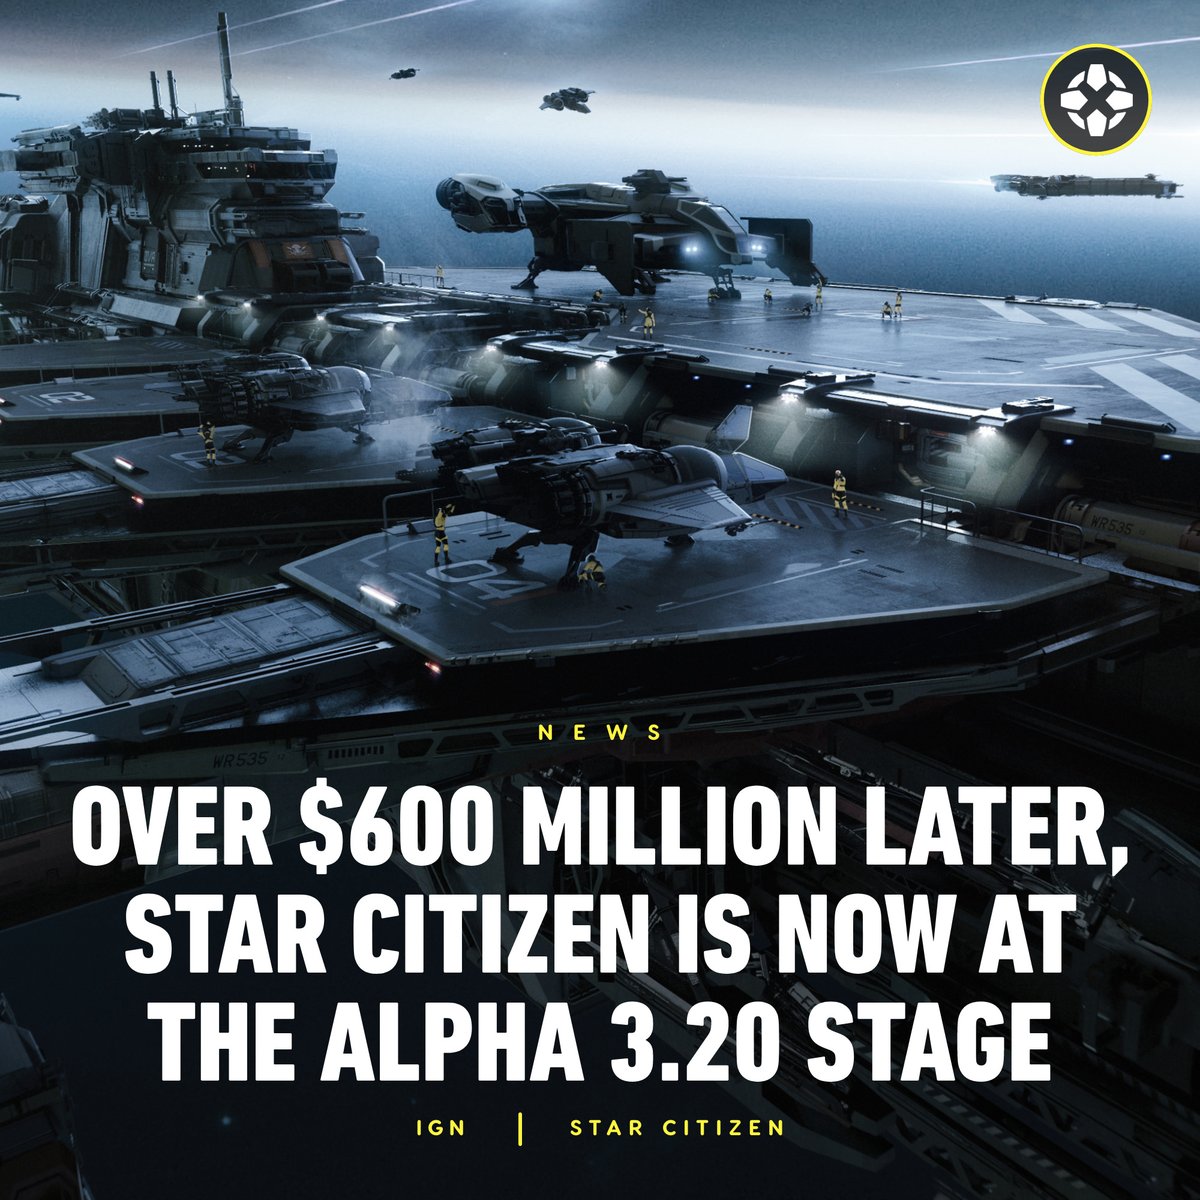 Over $600 Million Later, Star Citizen Is Now at the Alpha 3.20